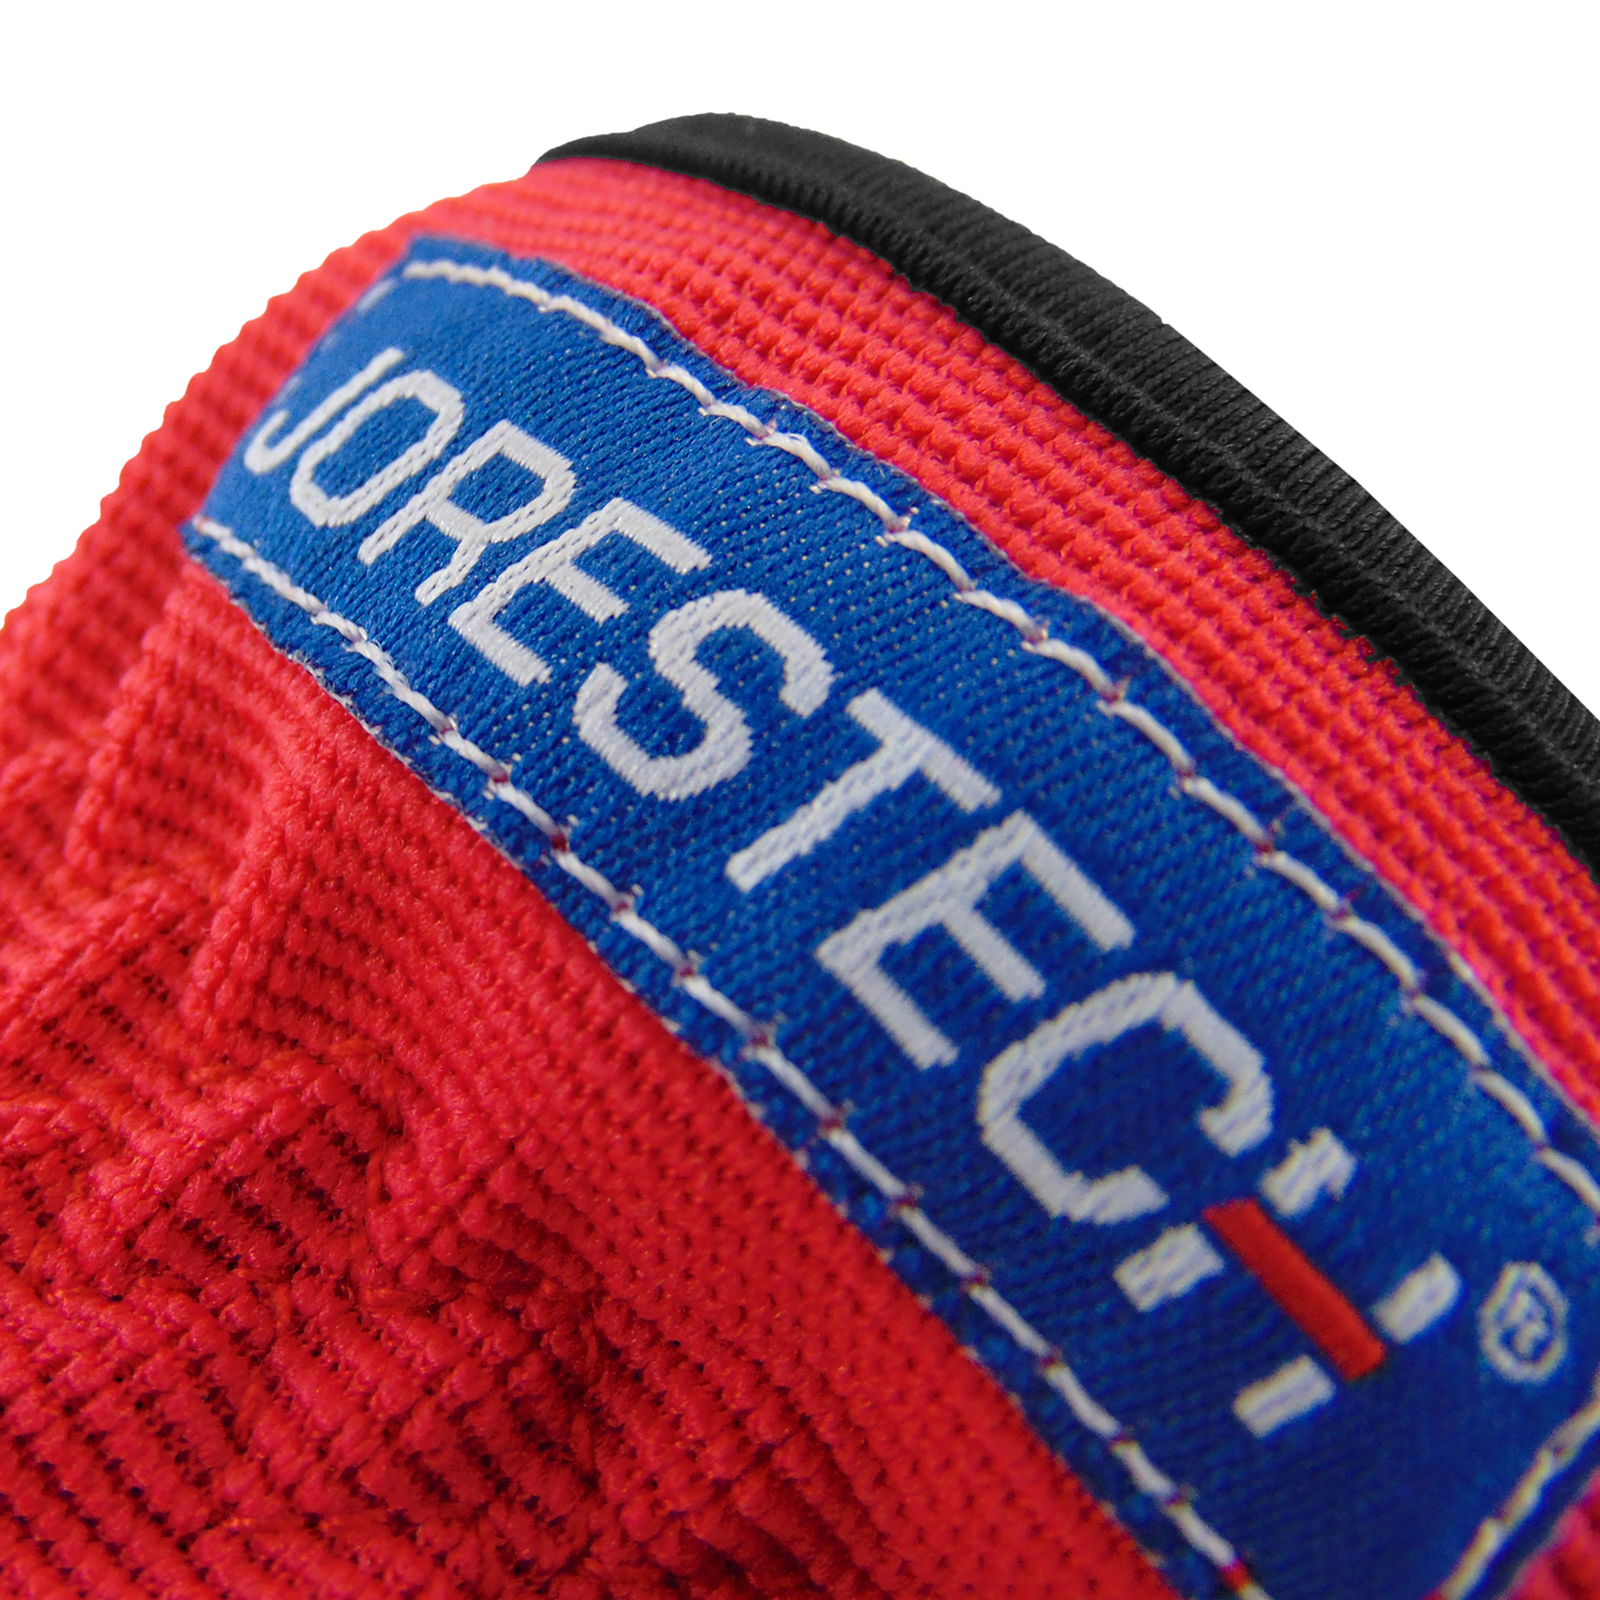 Close up of the elastic cuff of the JORESTECH safety gloves